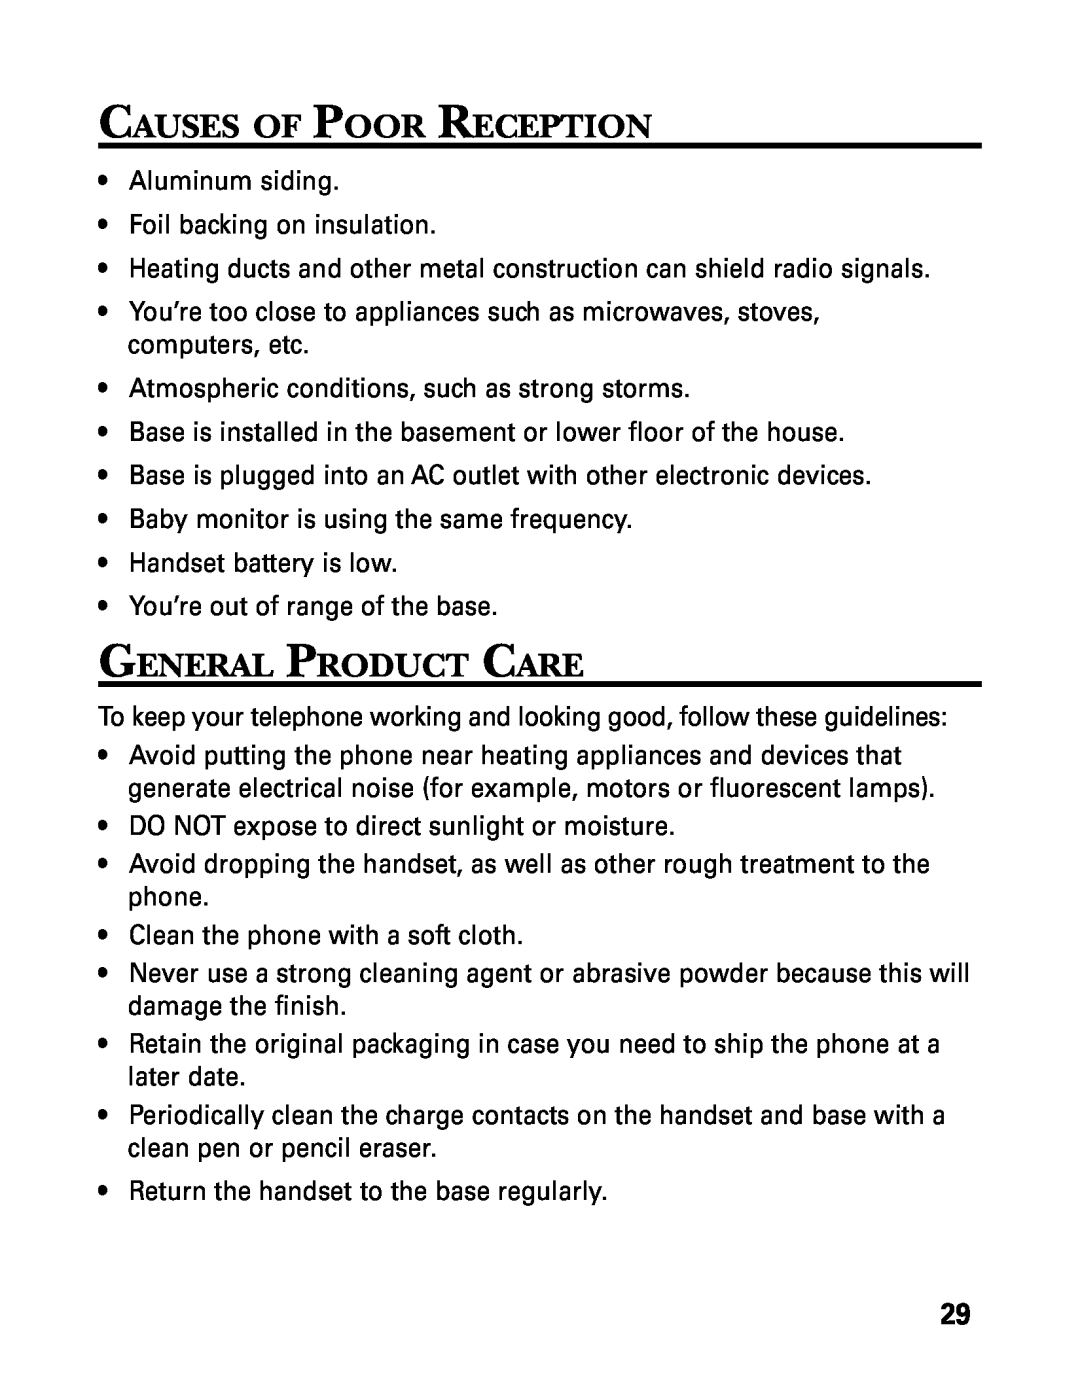 GE 27730 manual Causes Of Poor Reception, General Product Care 